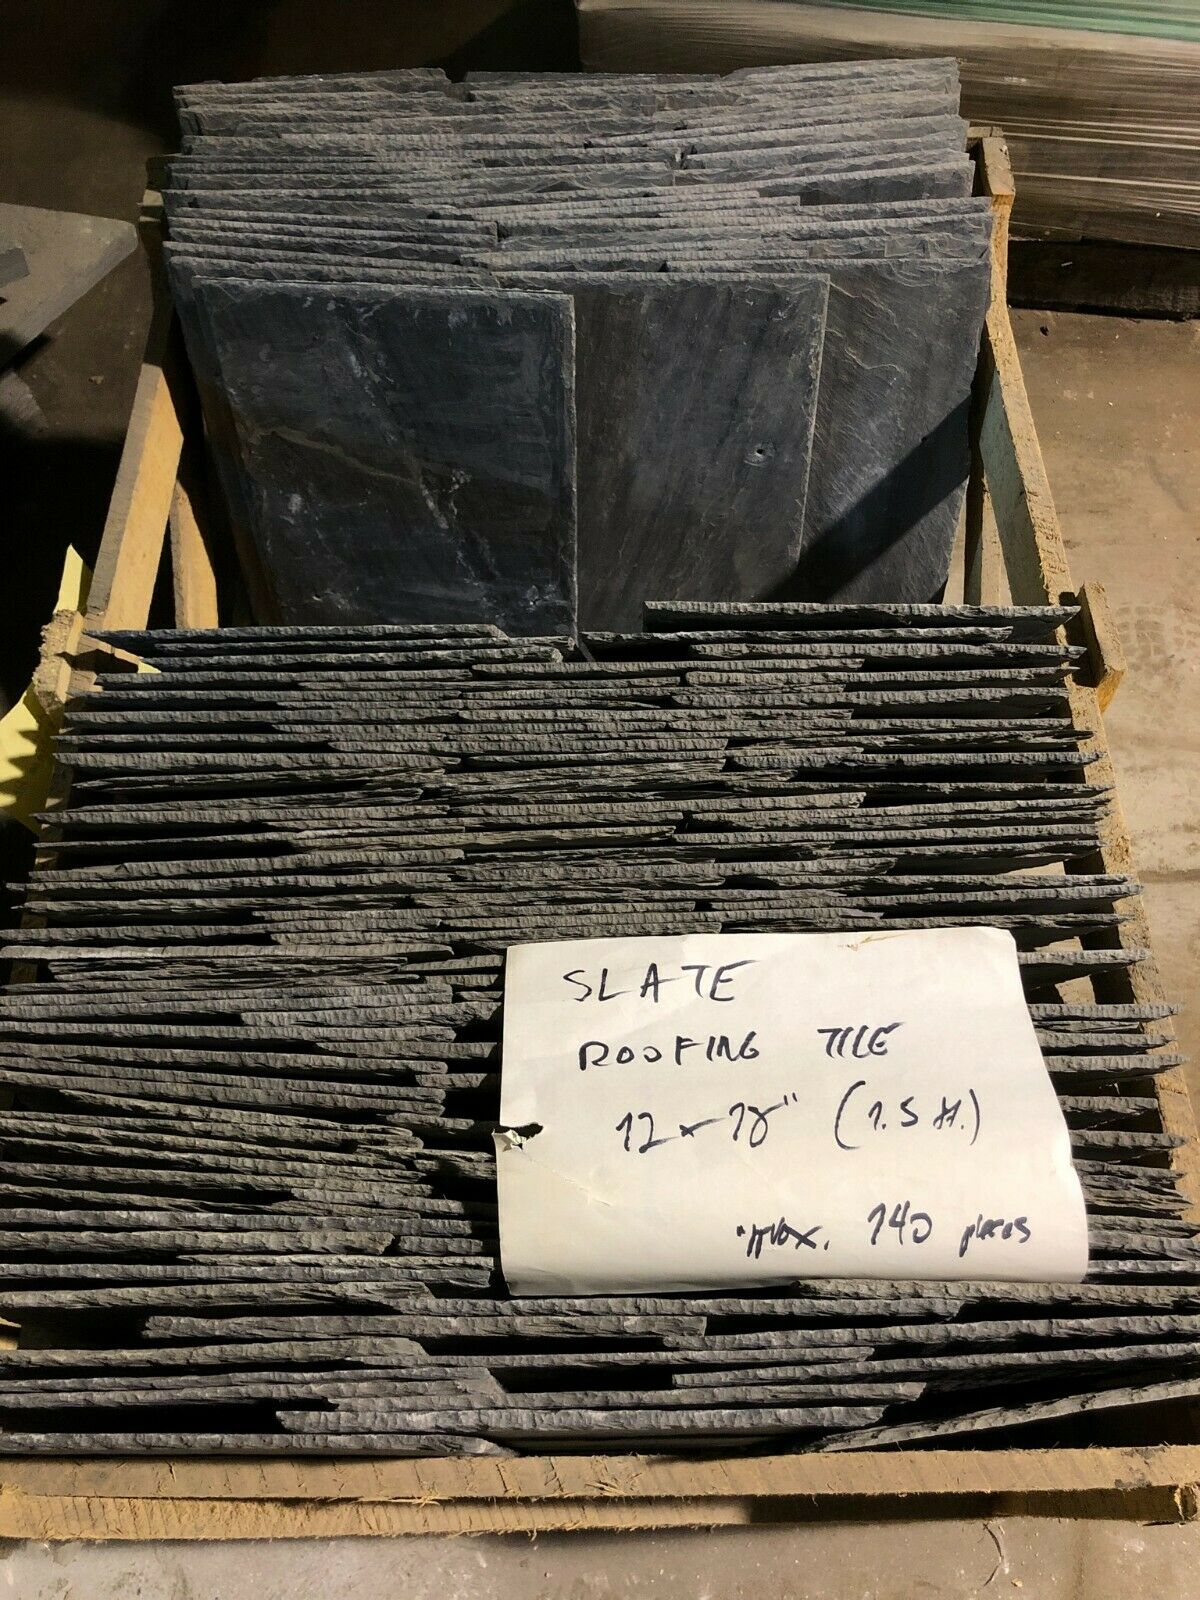 Multi-color Slate Roofing Tile (12x18) (approx. 140 Count)